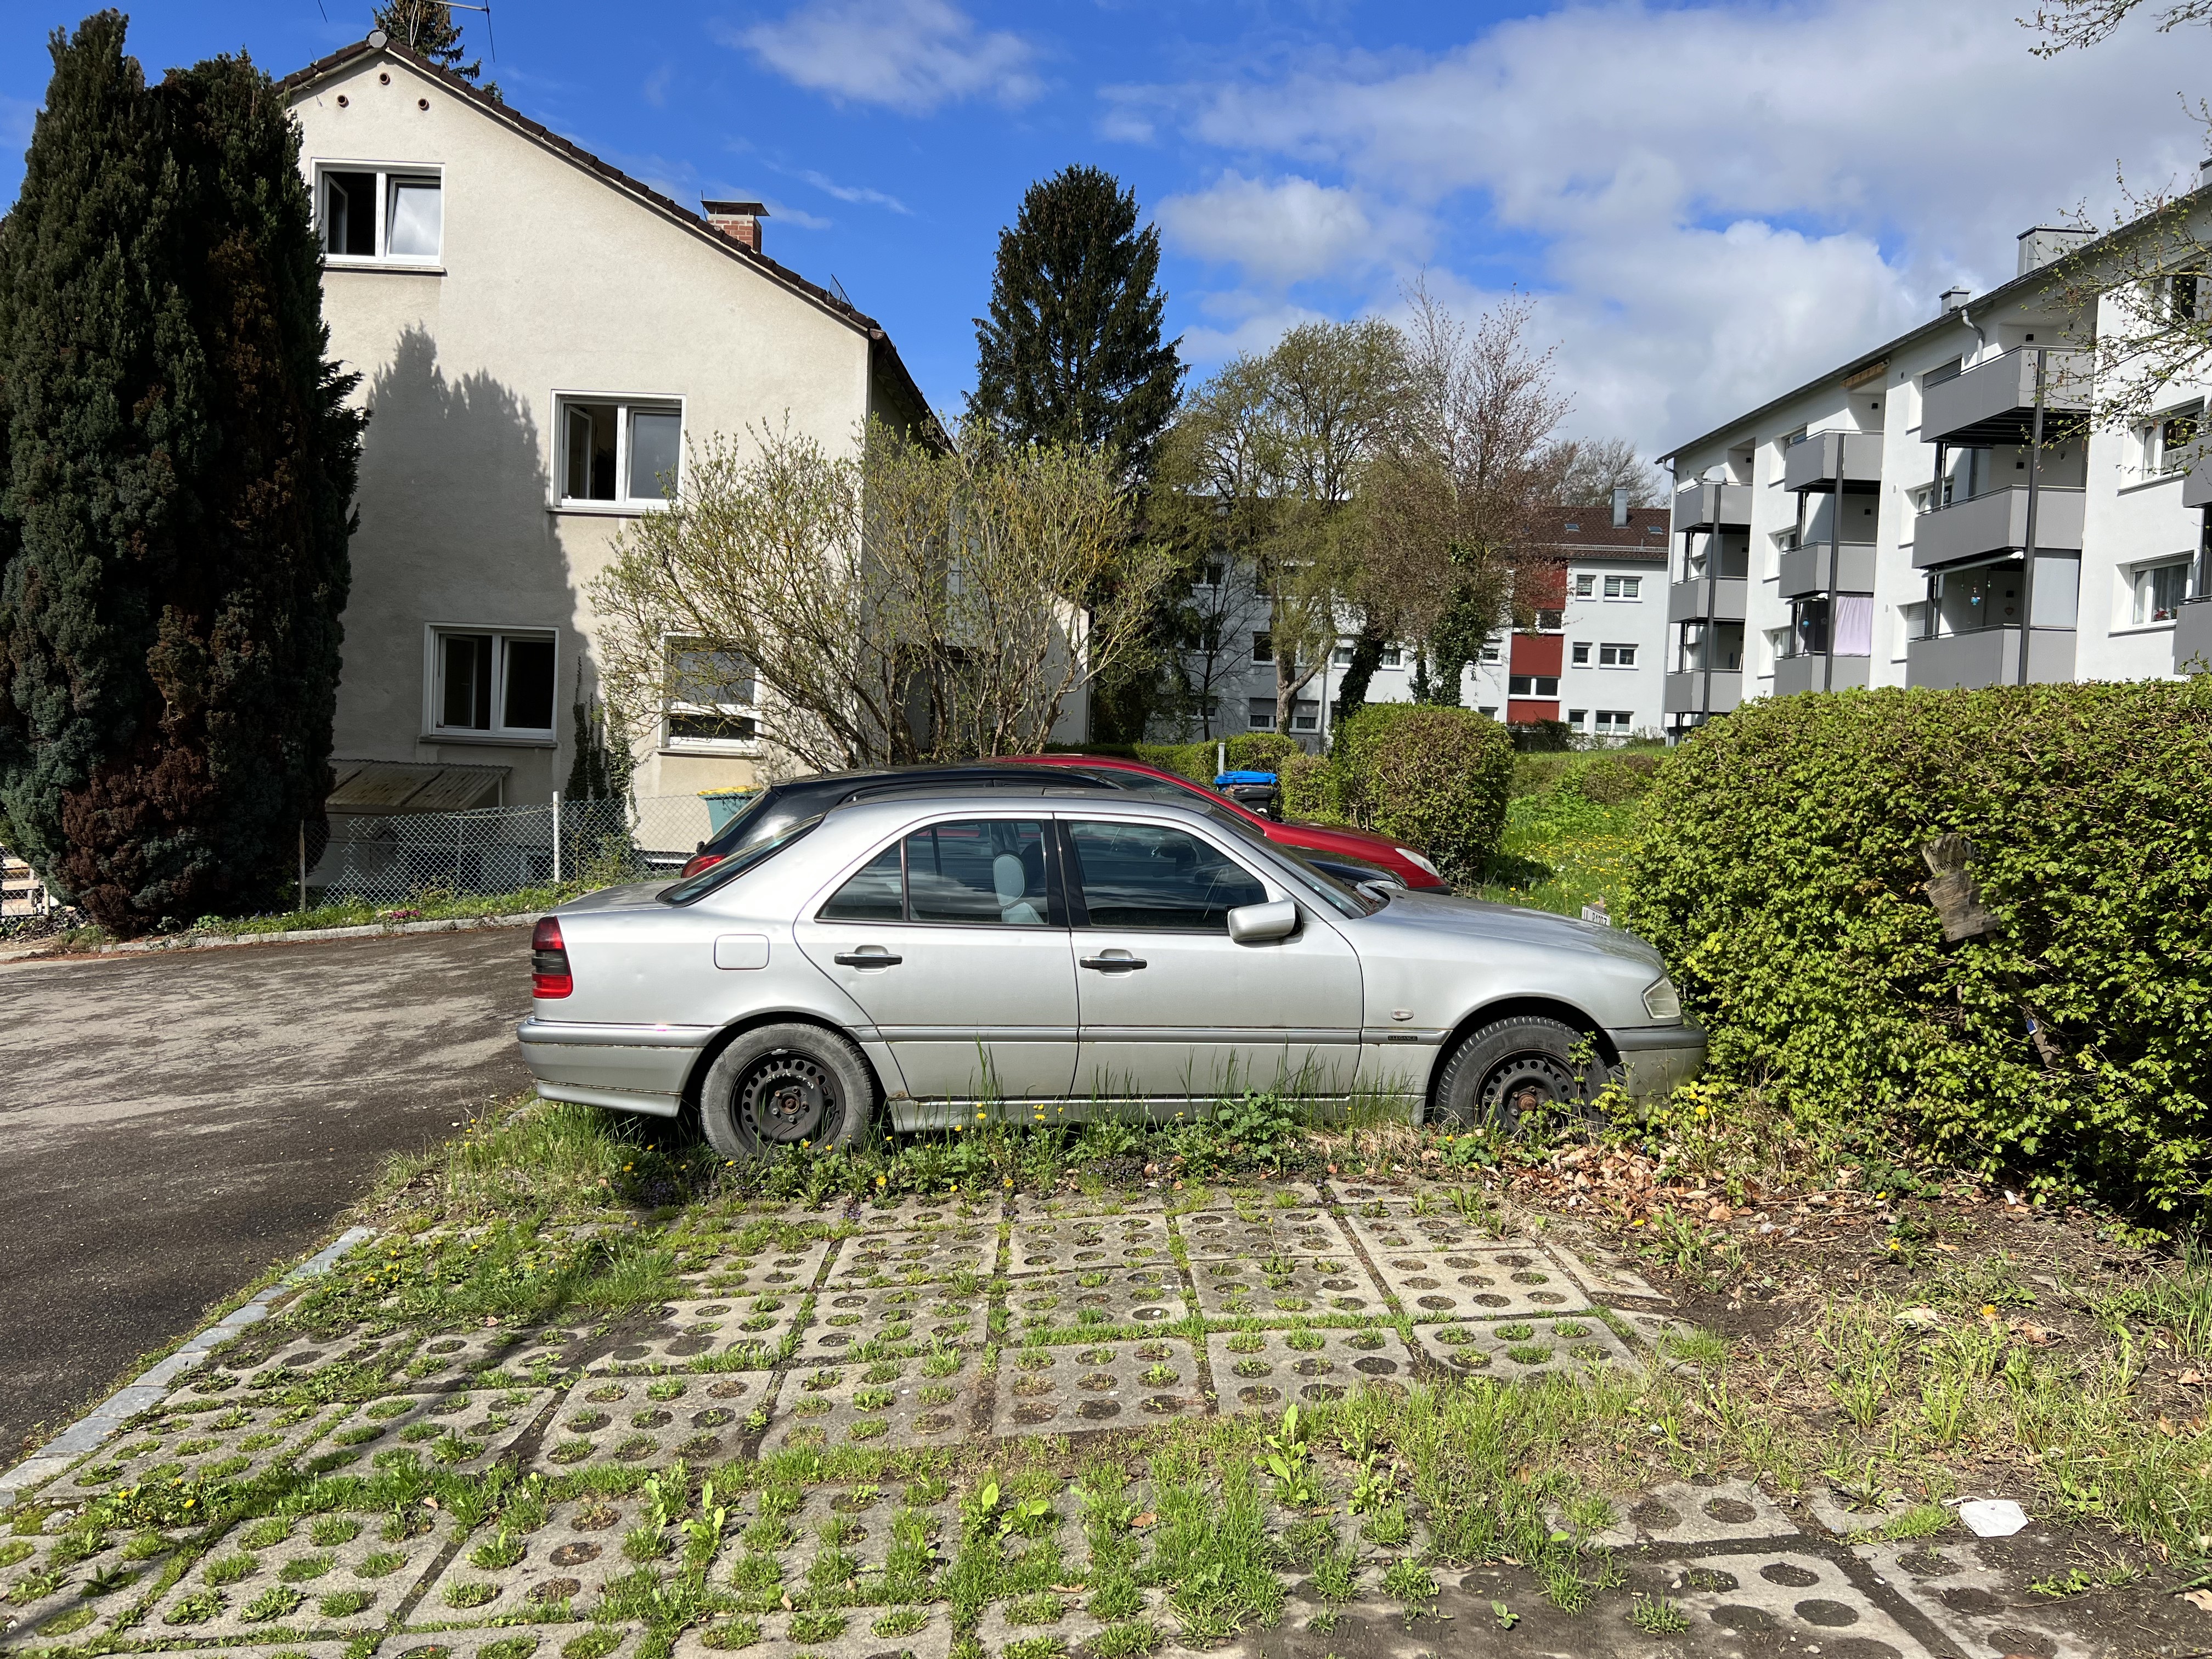 An old car sitting in a parking spot that is being overgrown by plants